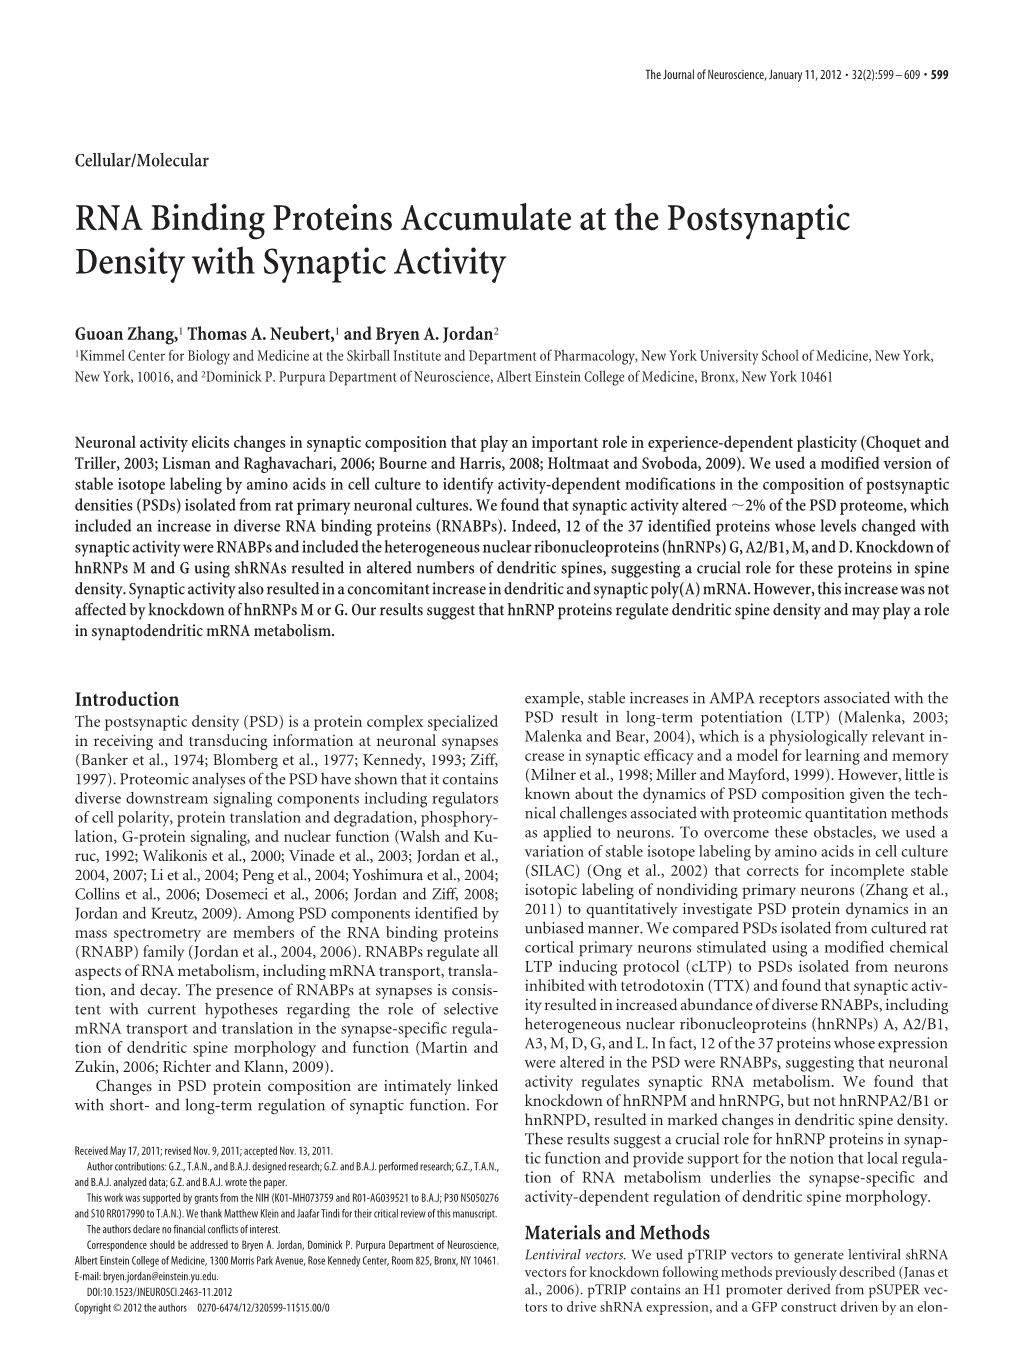 RNA Binding Proteins Accumulate at the Postsynaptic Density with Synaptic Activity